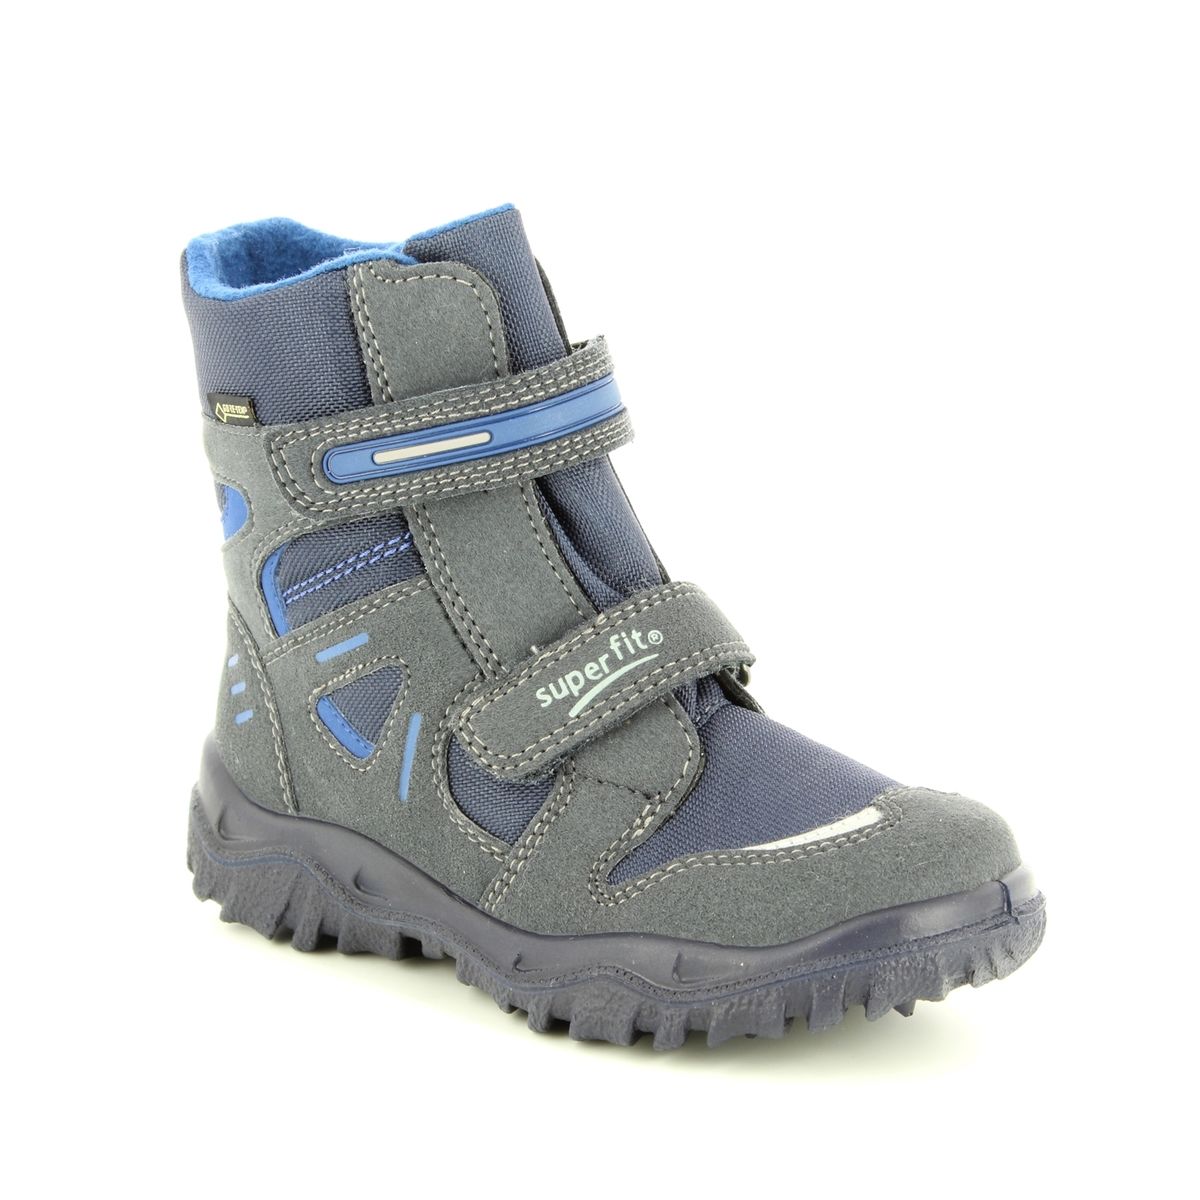 Superfit Husky Jnr Gore Navy Kids Boys Boots 09080-80 In Size 37 In Plain Navy For kids